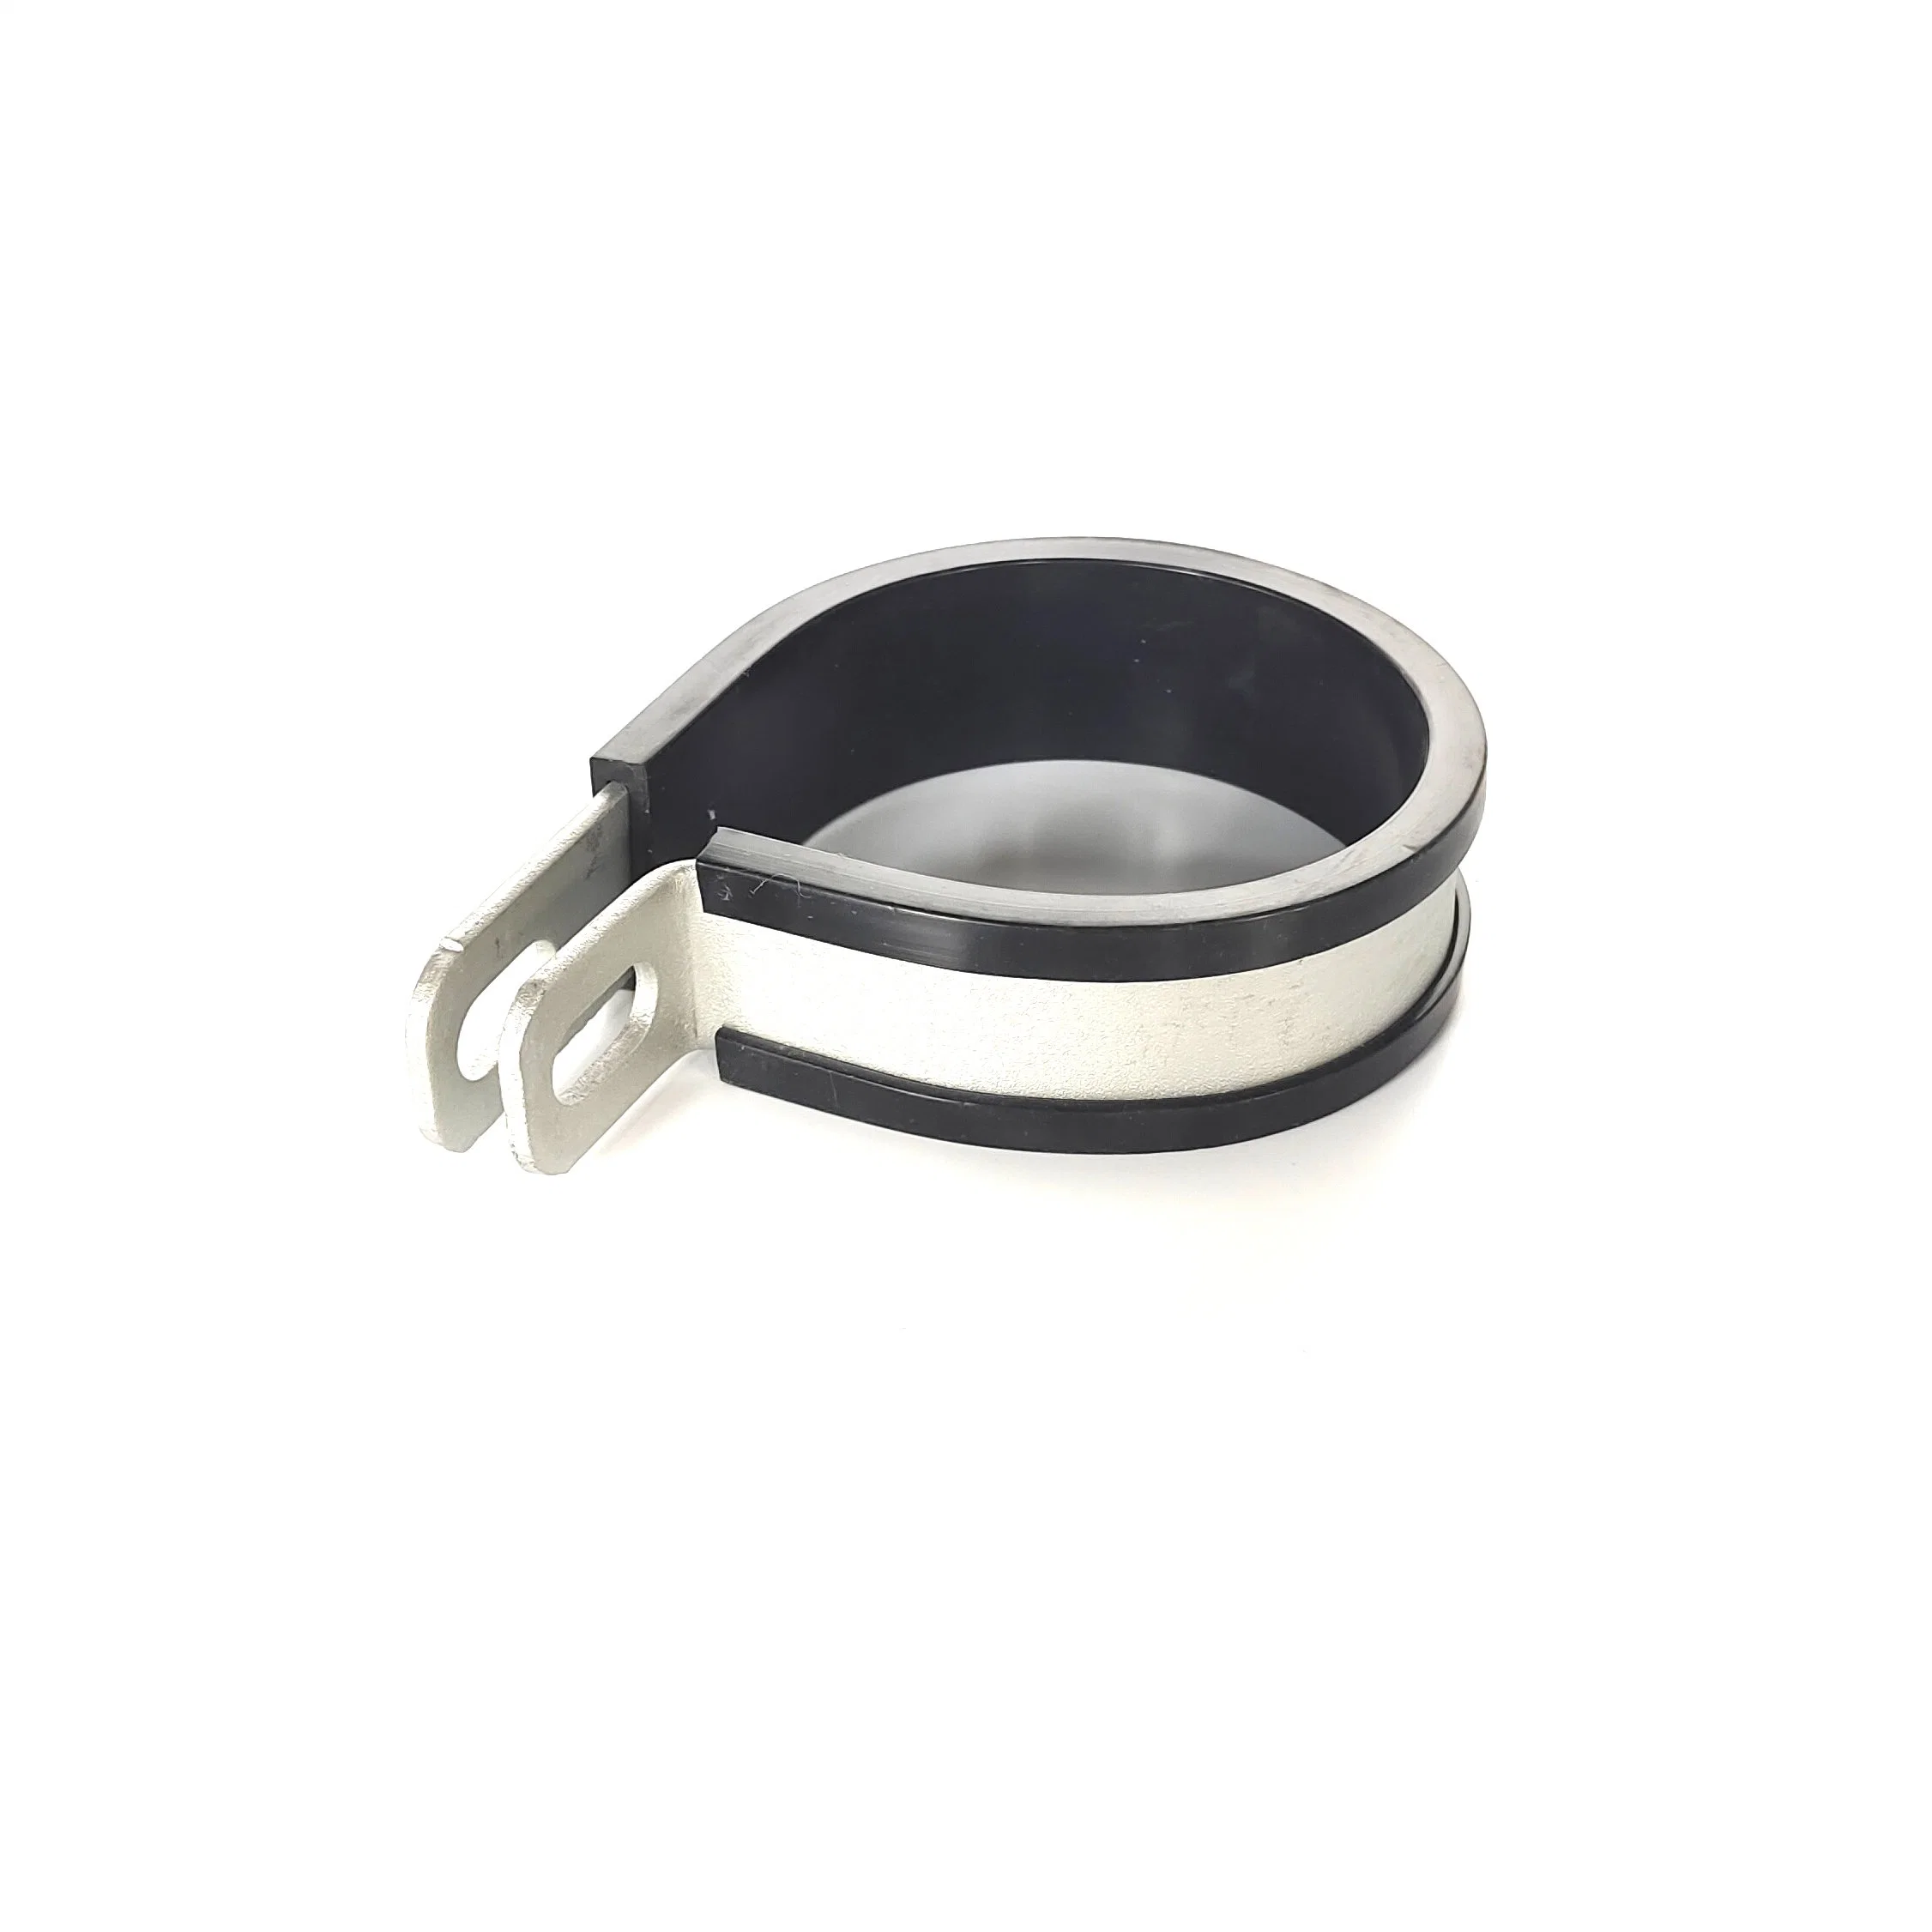 Stainless Steel Hose Clamp - Secure Pipe Hose Clip Clamp for Cost-Effective and Easy Installation